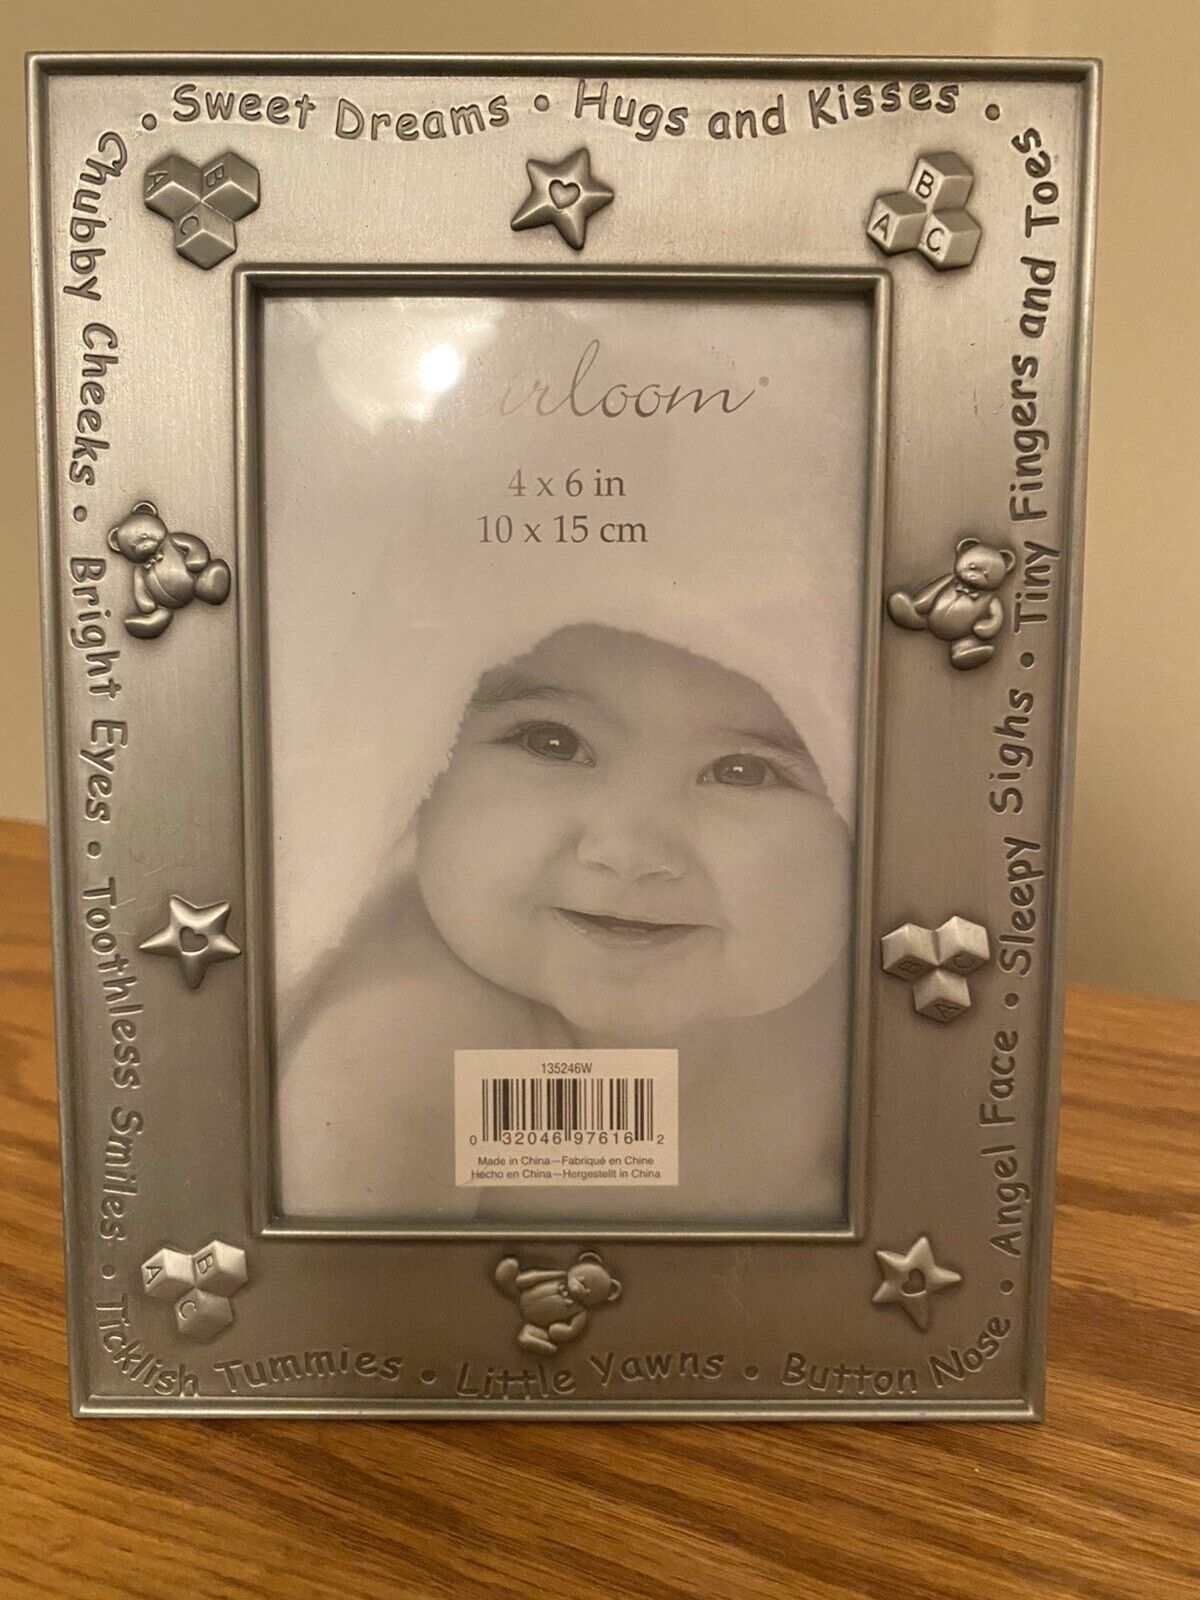 Heirloom Baby Pewter Picture Frame With Stars, Blocks, Teddy Bears Sweet Dreams